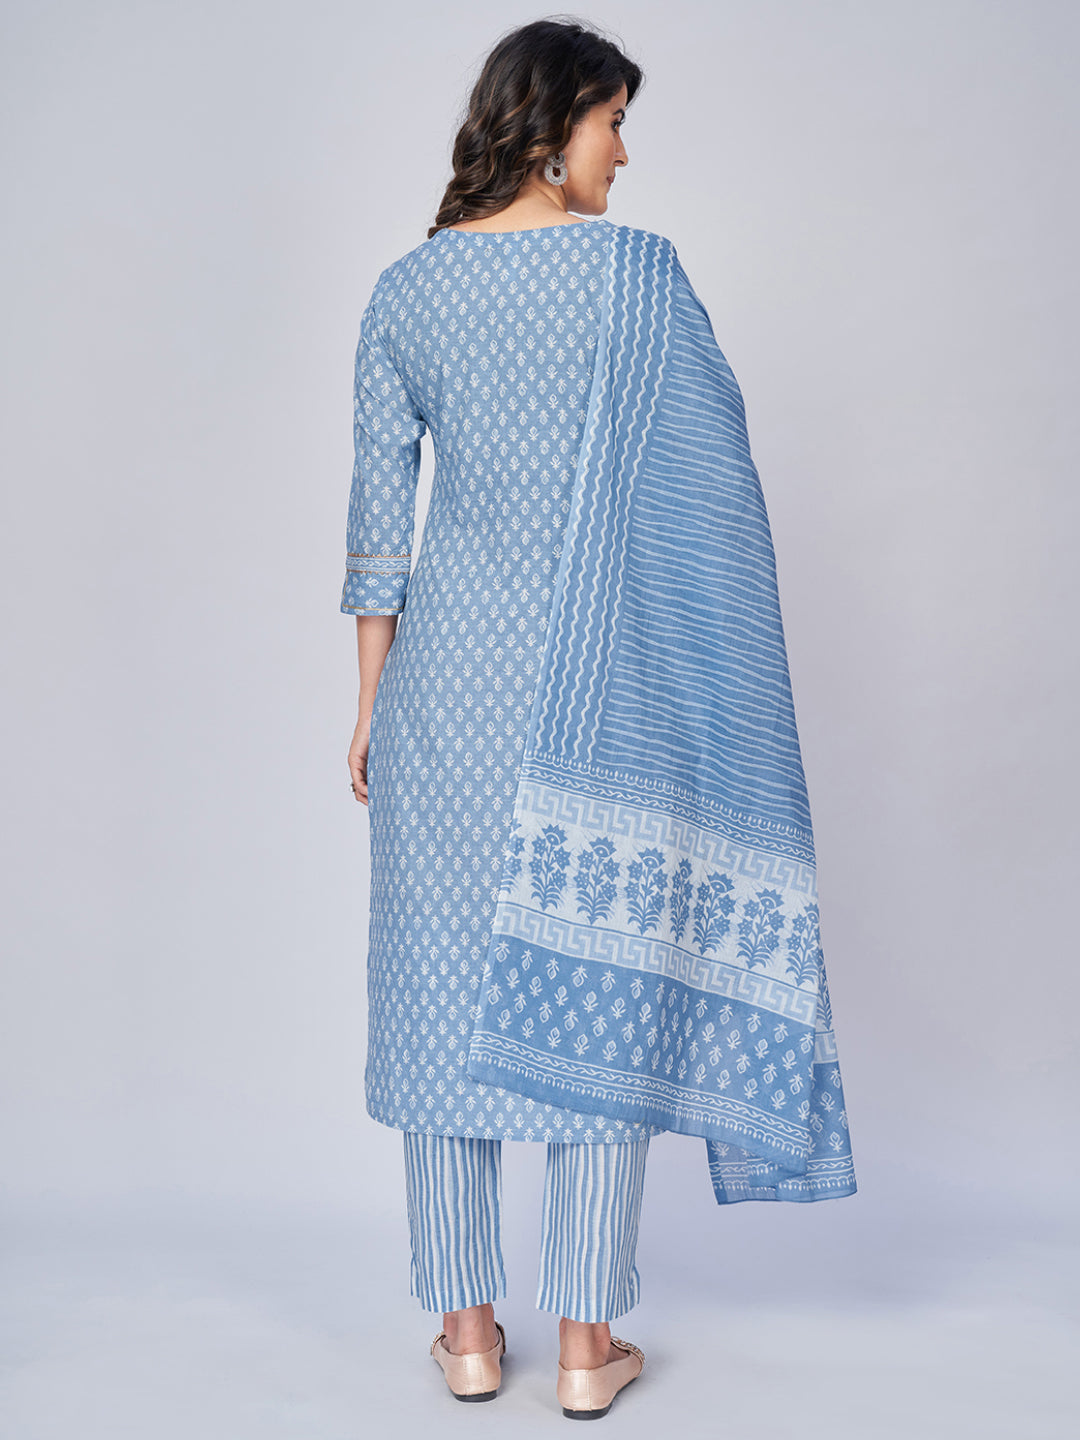 Women's Printed & Embroidered Straight Cotton Sky Blue Kurta Pant With Dupatta (3Pcs Set) - Final Clearance Sale